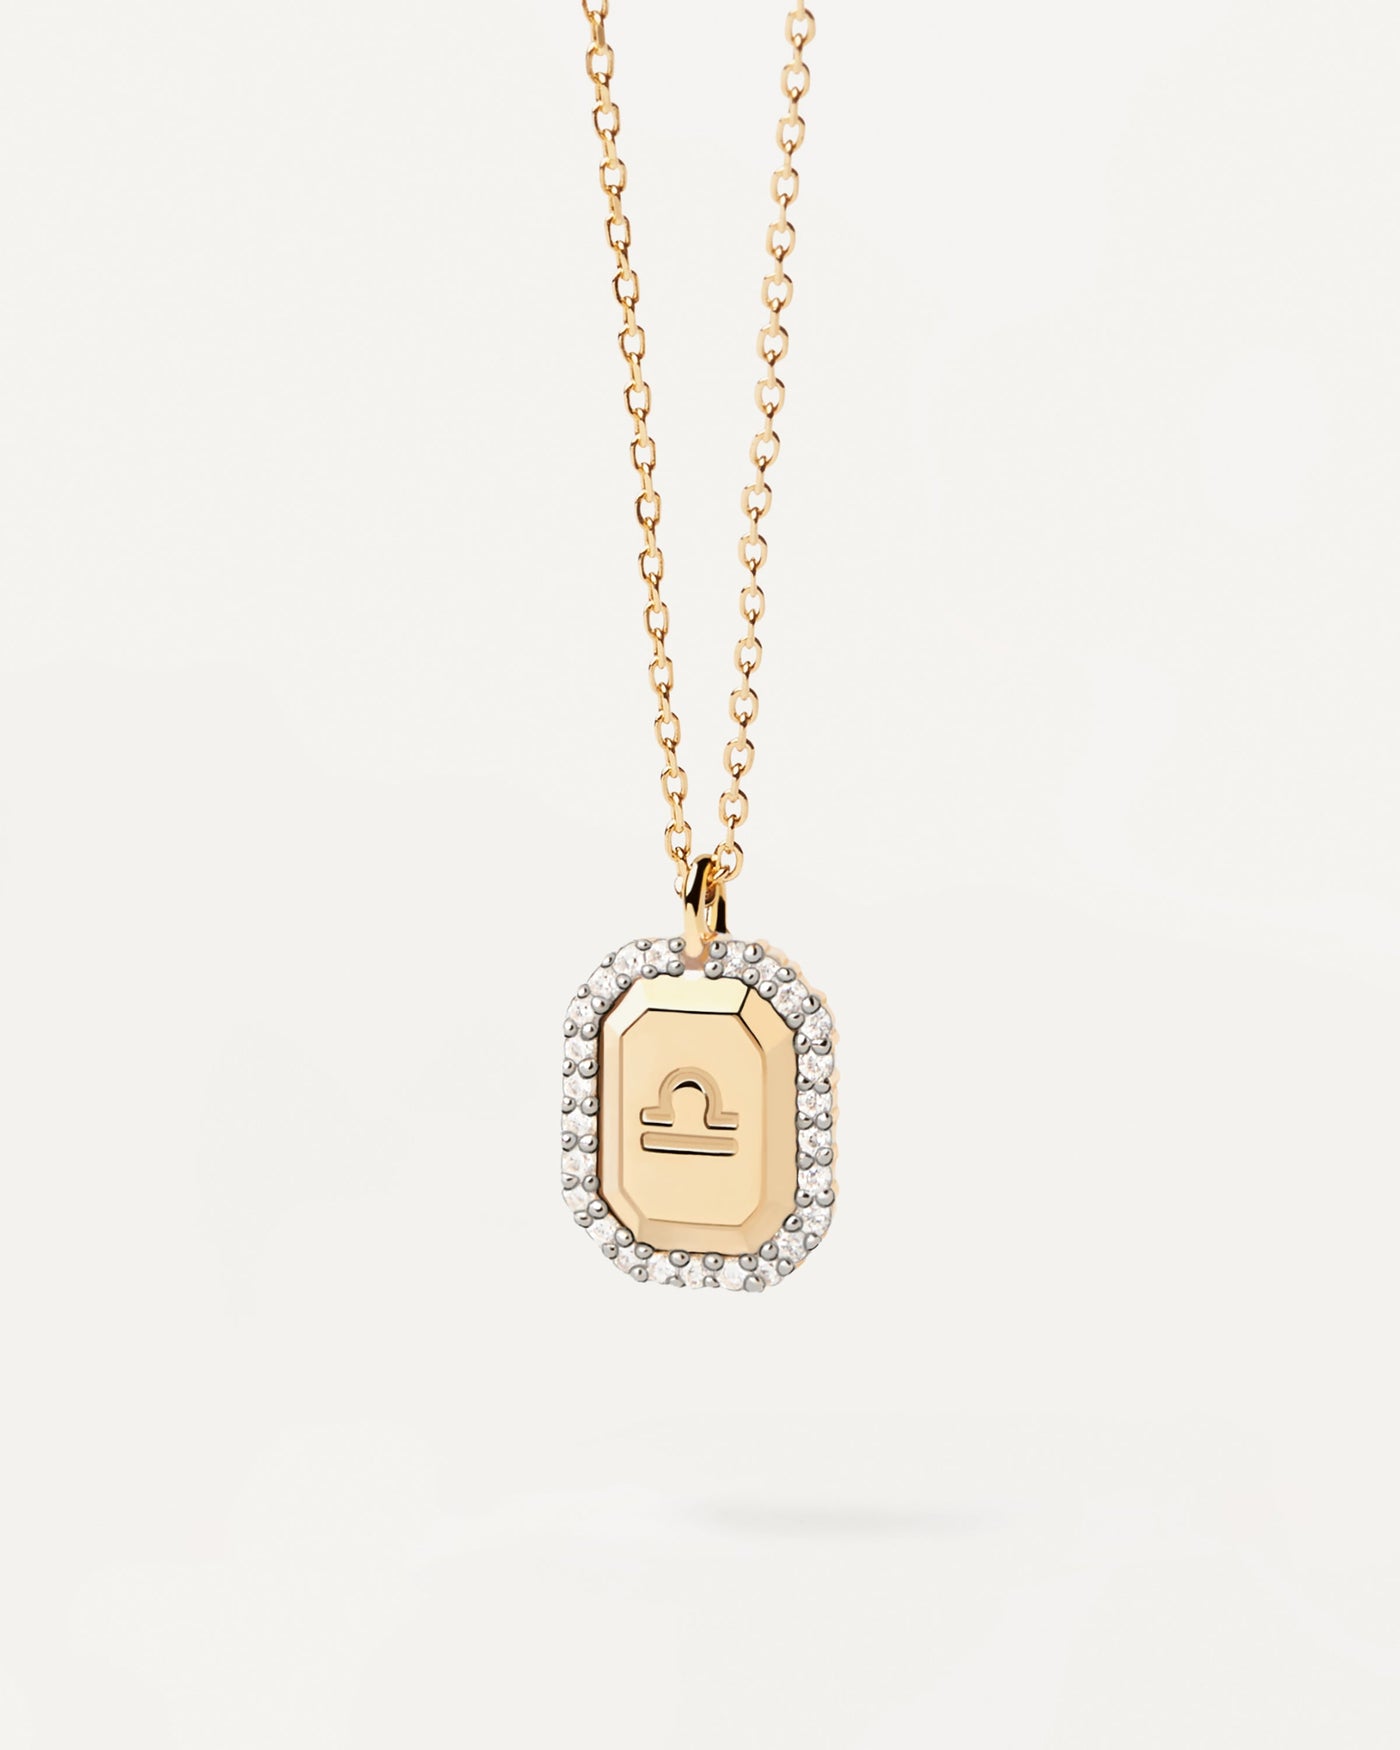 2023 Selection | Libra Necklace. Necklace with octagonal pendant in gold-plated silver with Libra constellation sign. Get the latest arrival from PDPAOLA. Place your order safely and get this Best Seller. Free Shipping.